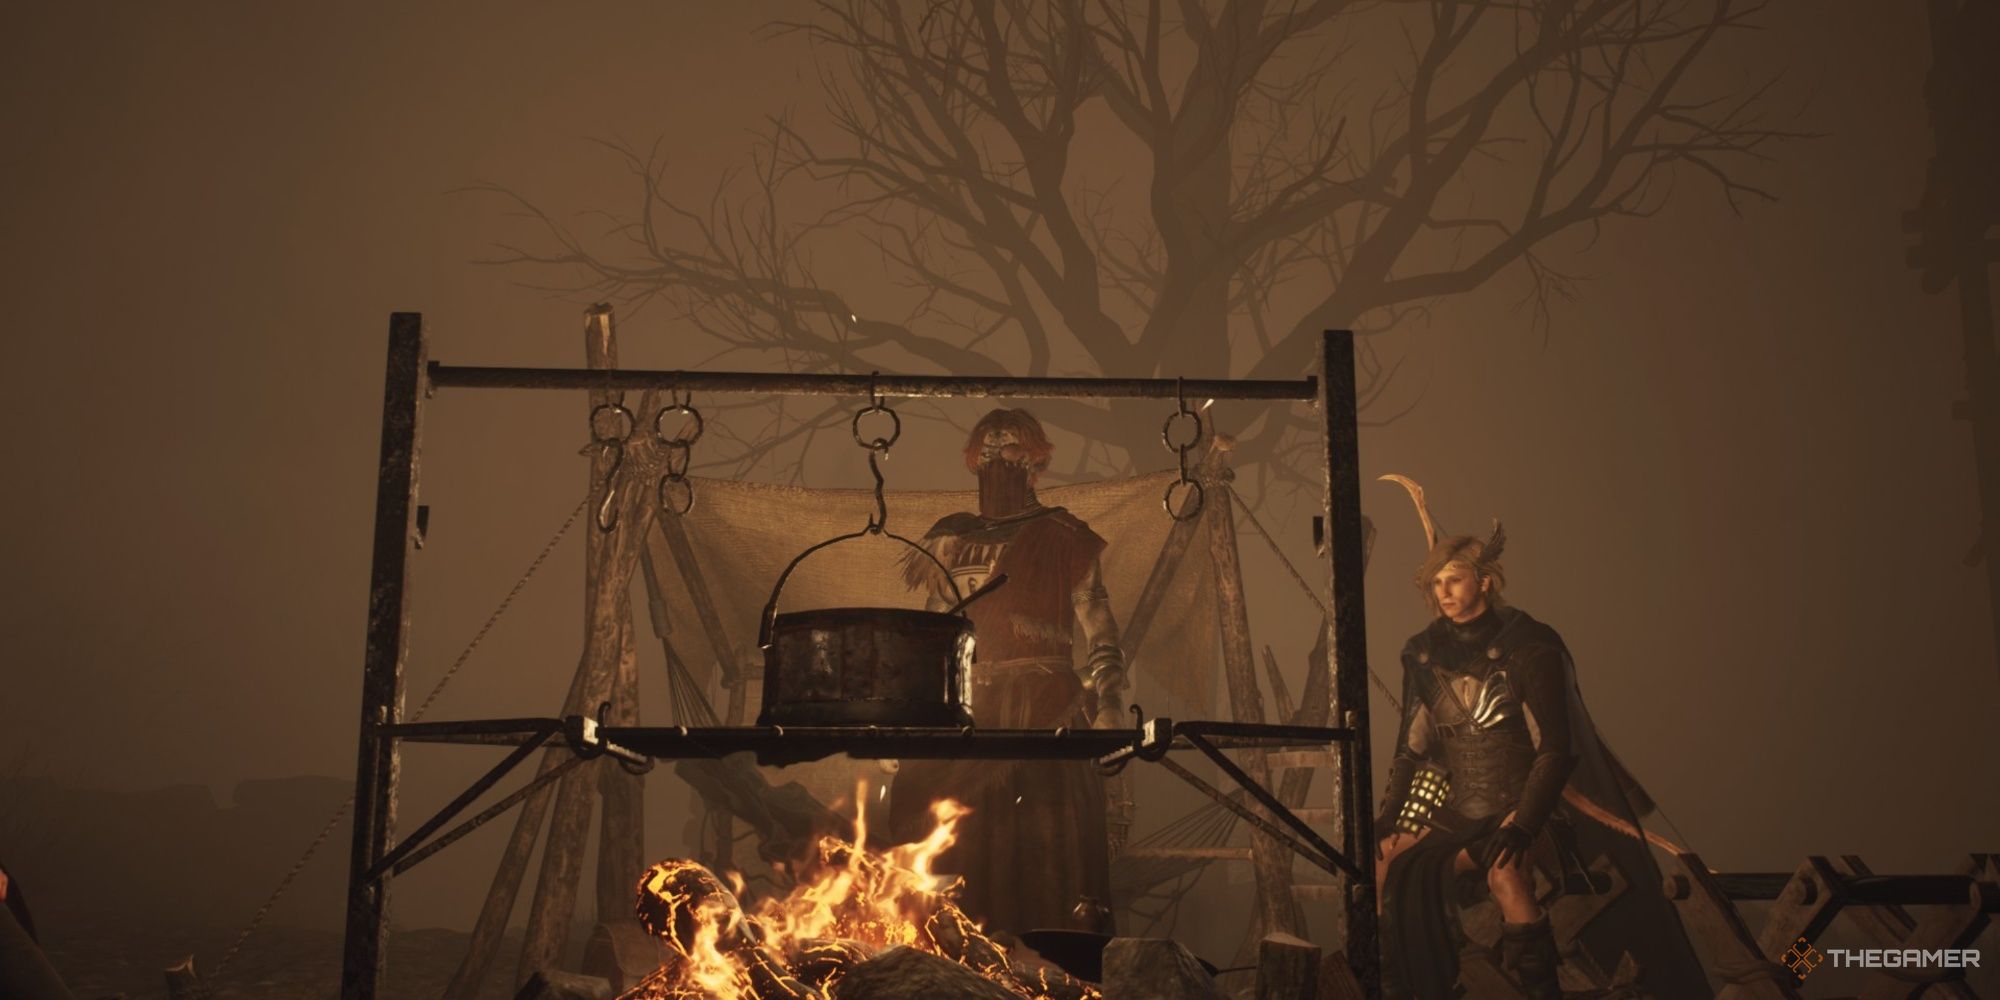 A Pawn and the Arisen stood in front of the cooking pot of a campfire at night